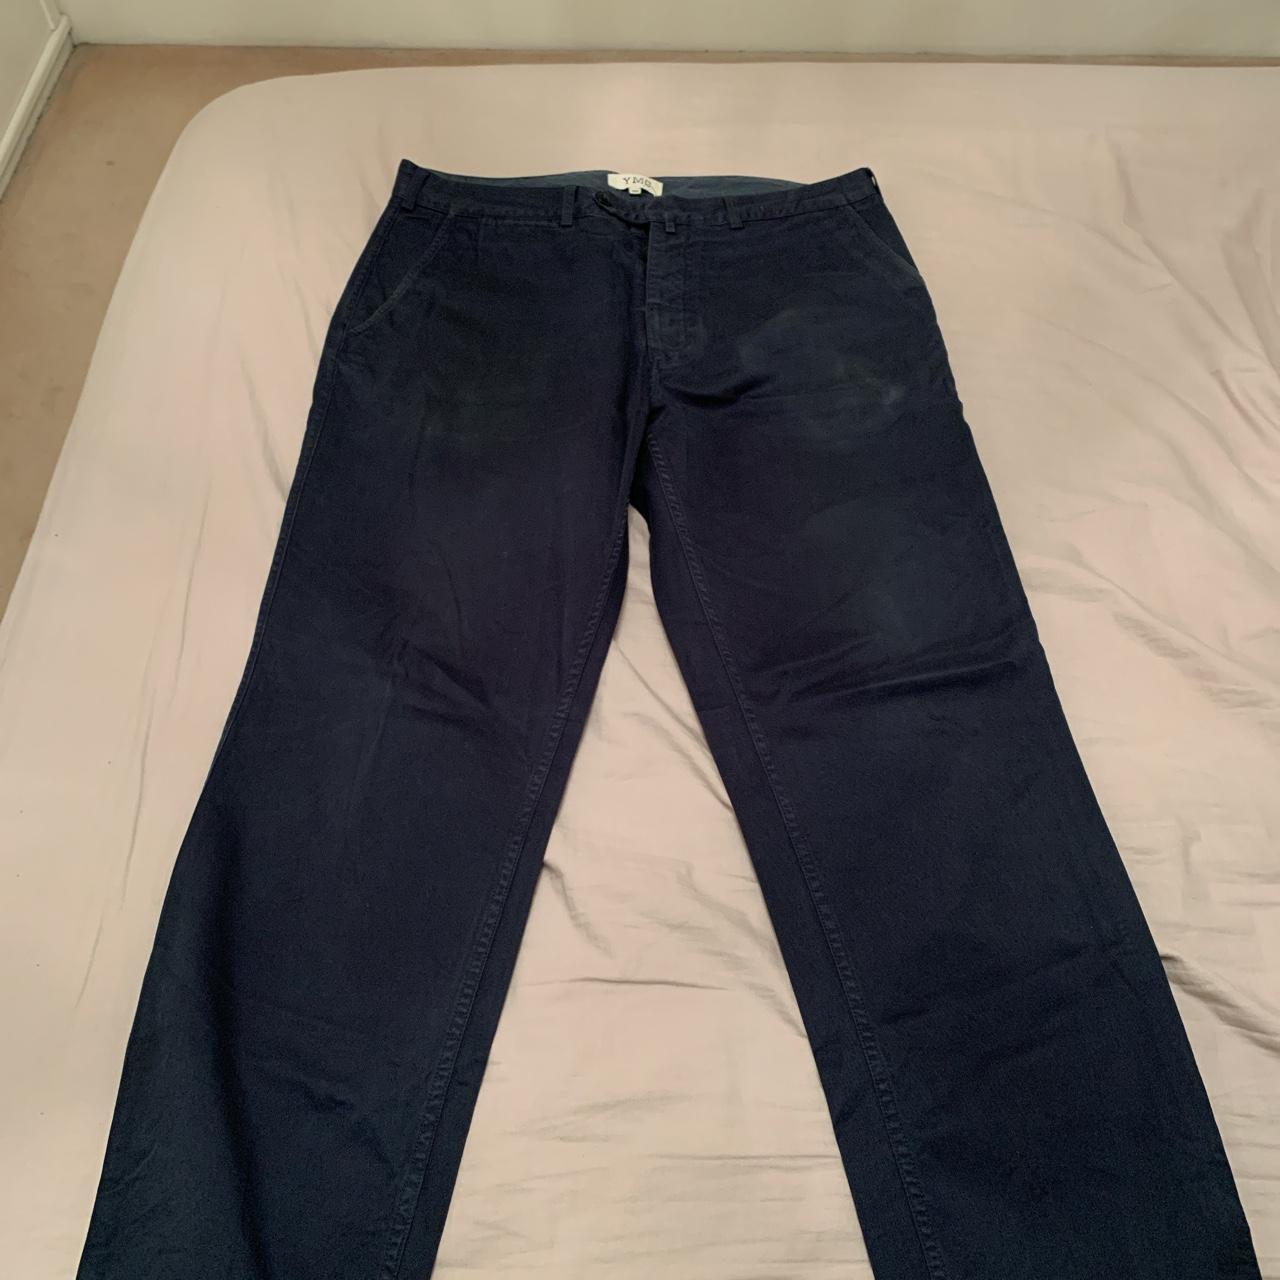 YMC - you must create trousers Bought from Harvey... - Depop